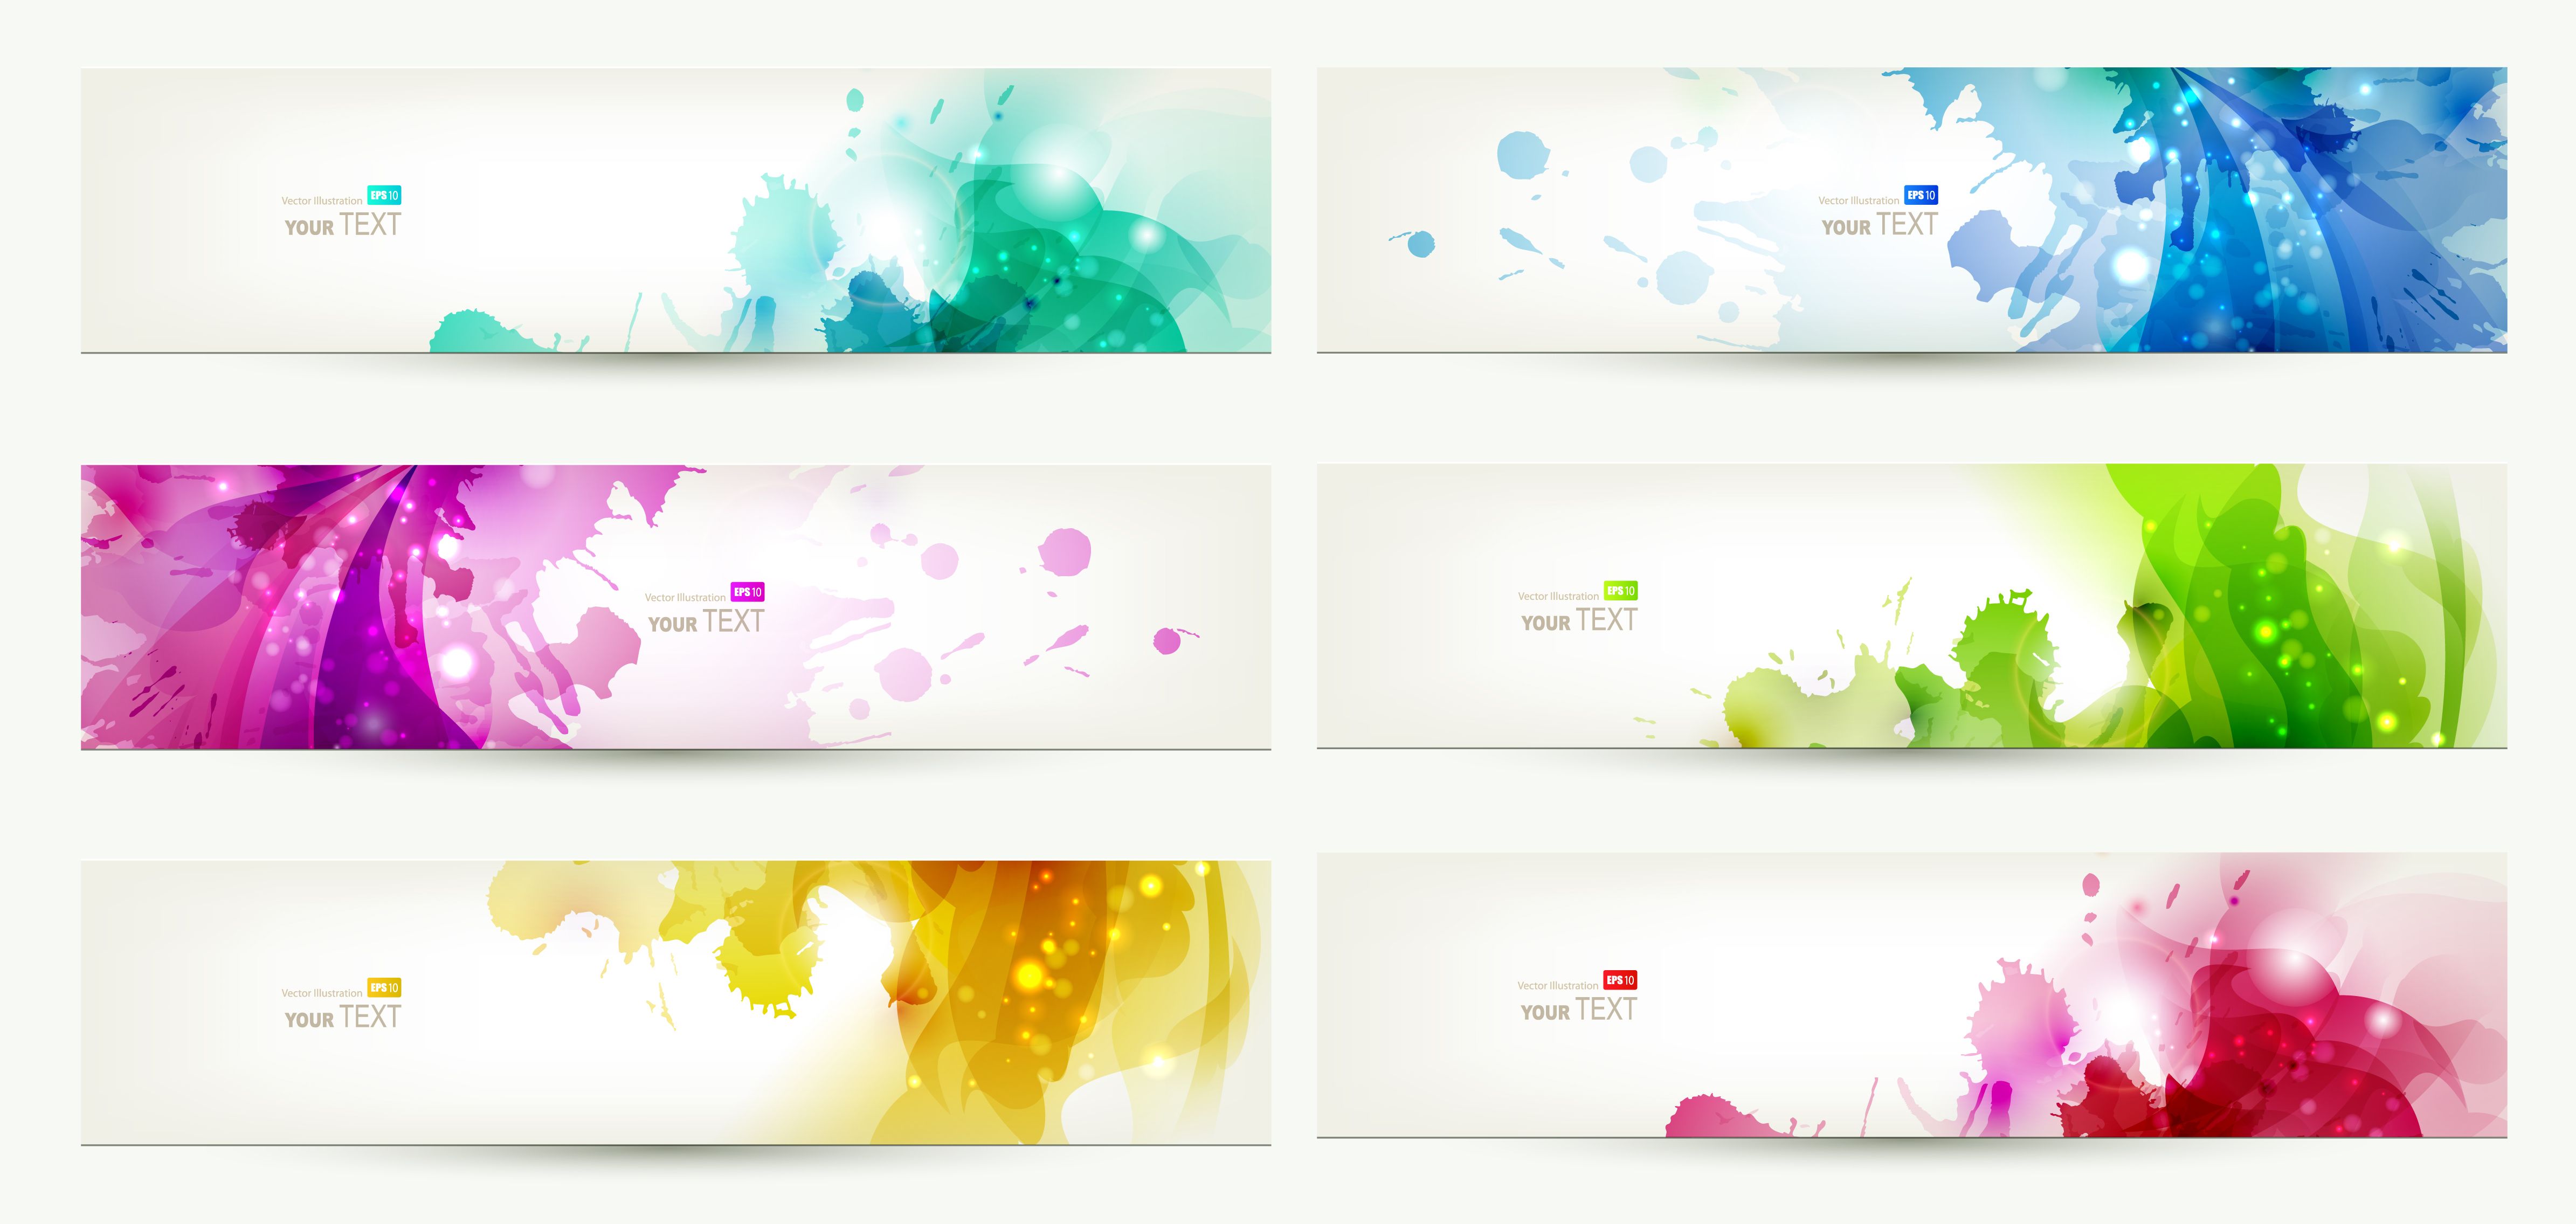 The best free Banner vector images. Download from 2691 free vectors of